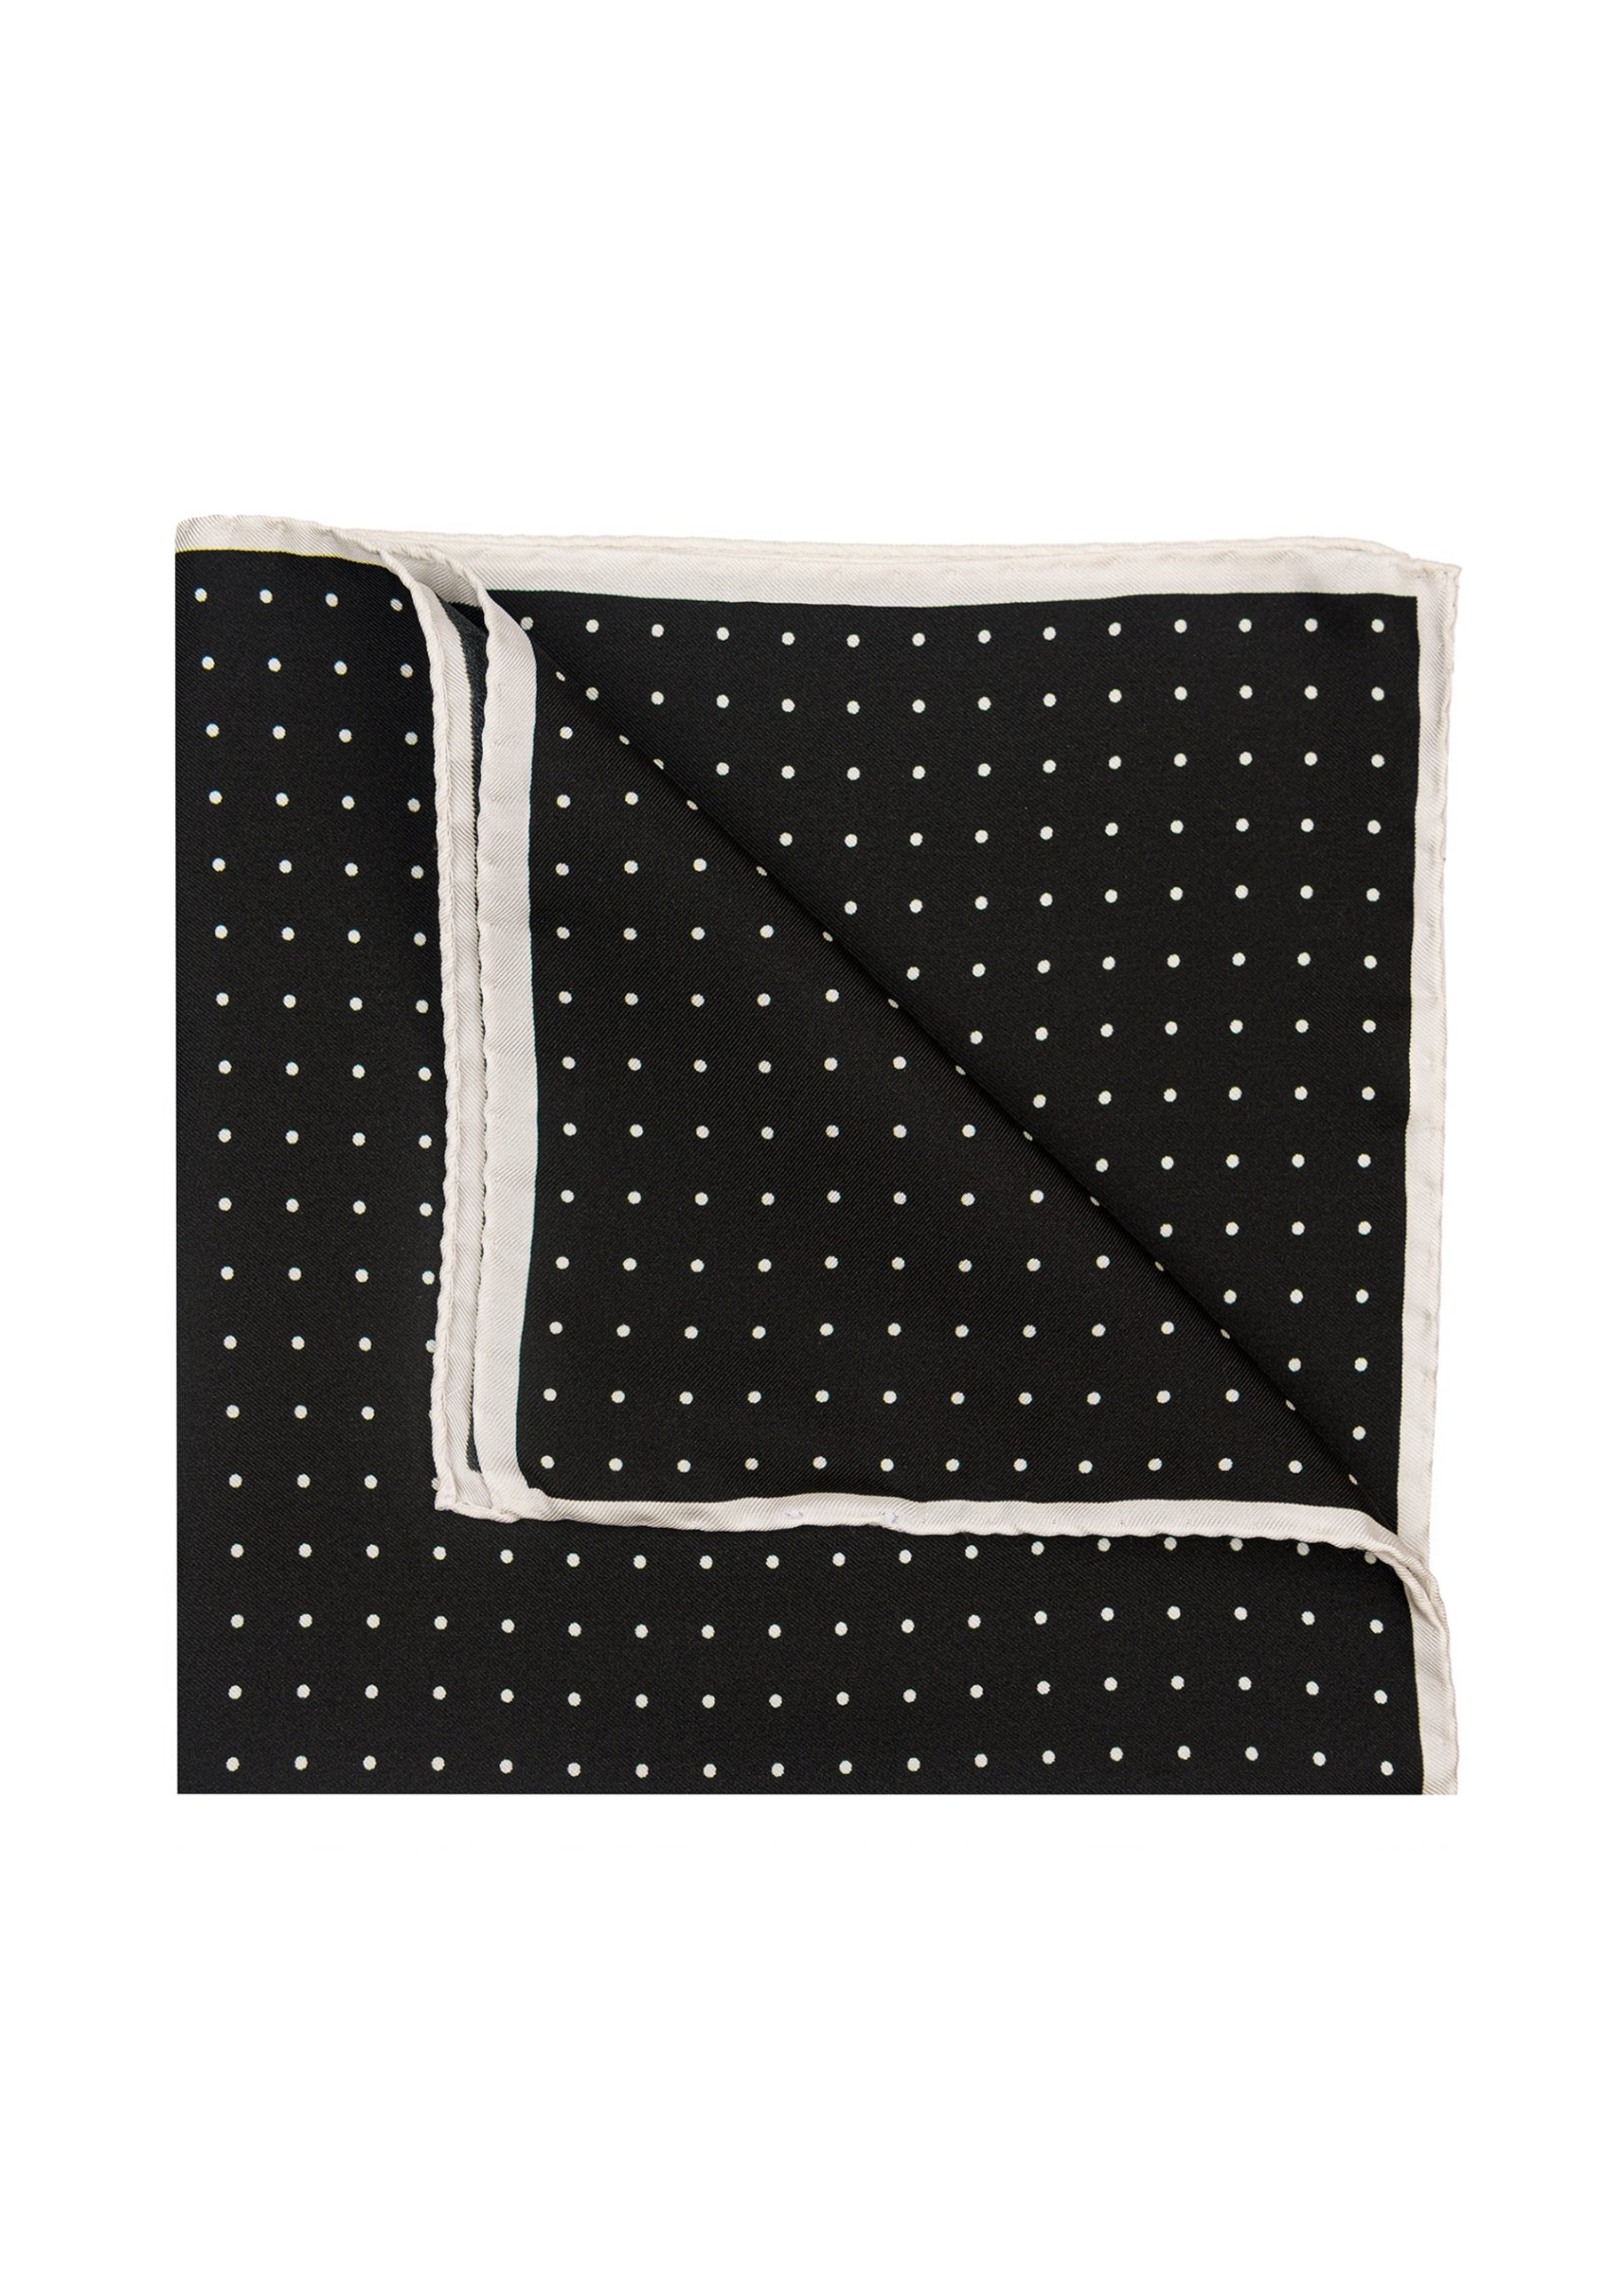 Black and white silk pocket square by Roderick Charles